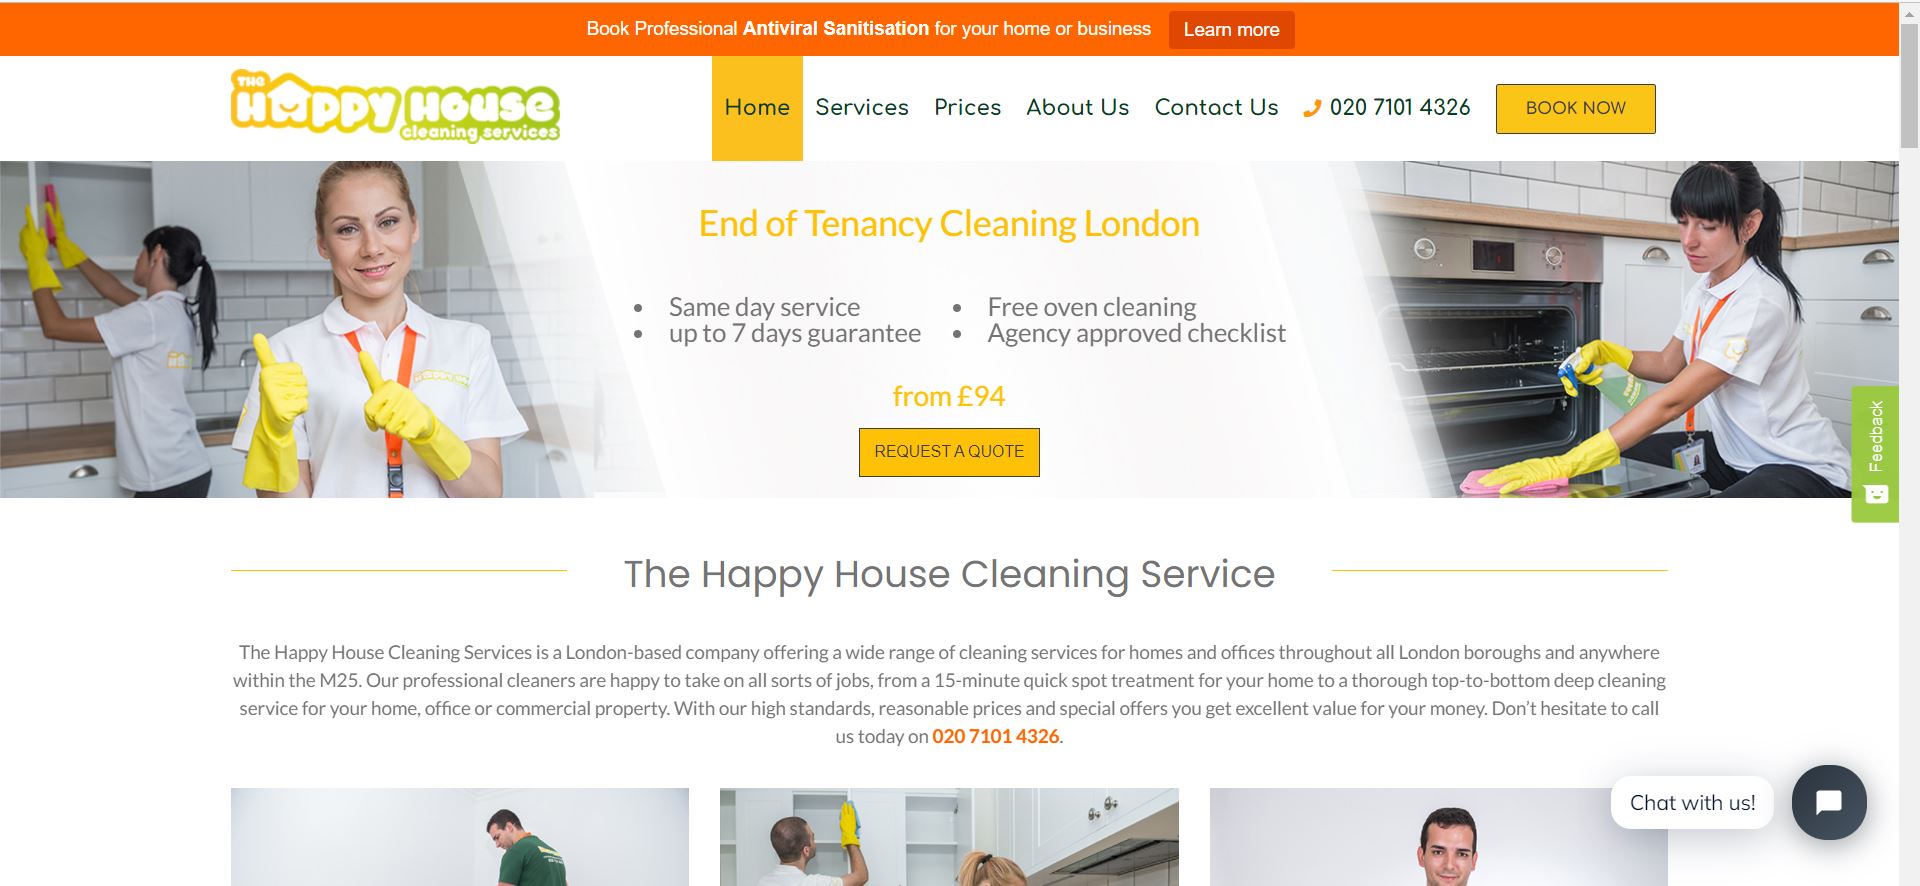 The Happy house cleaning